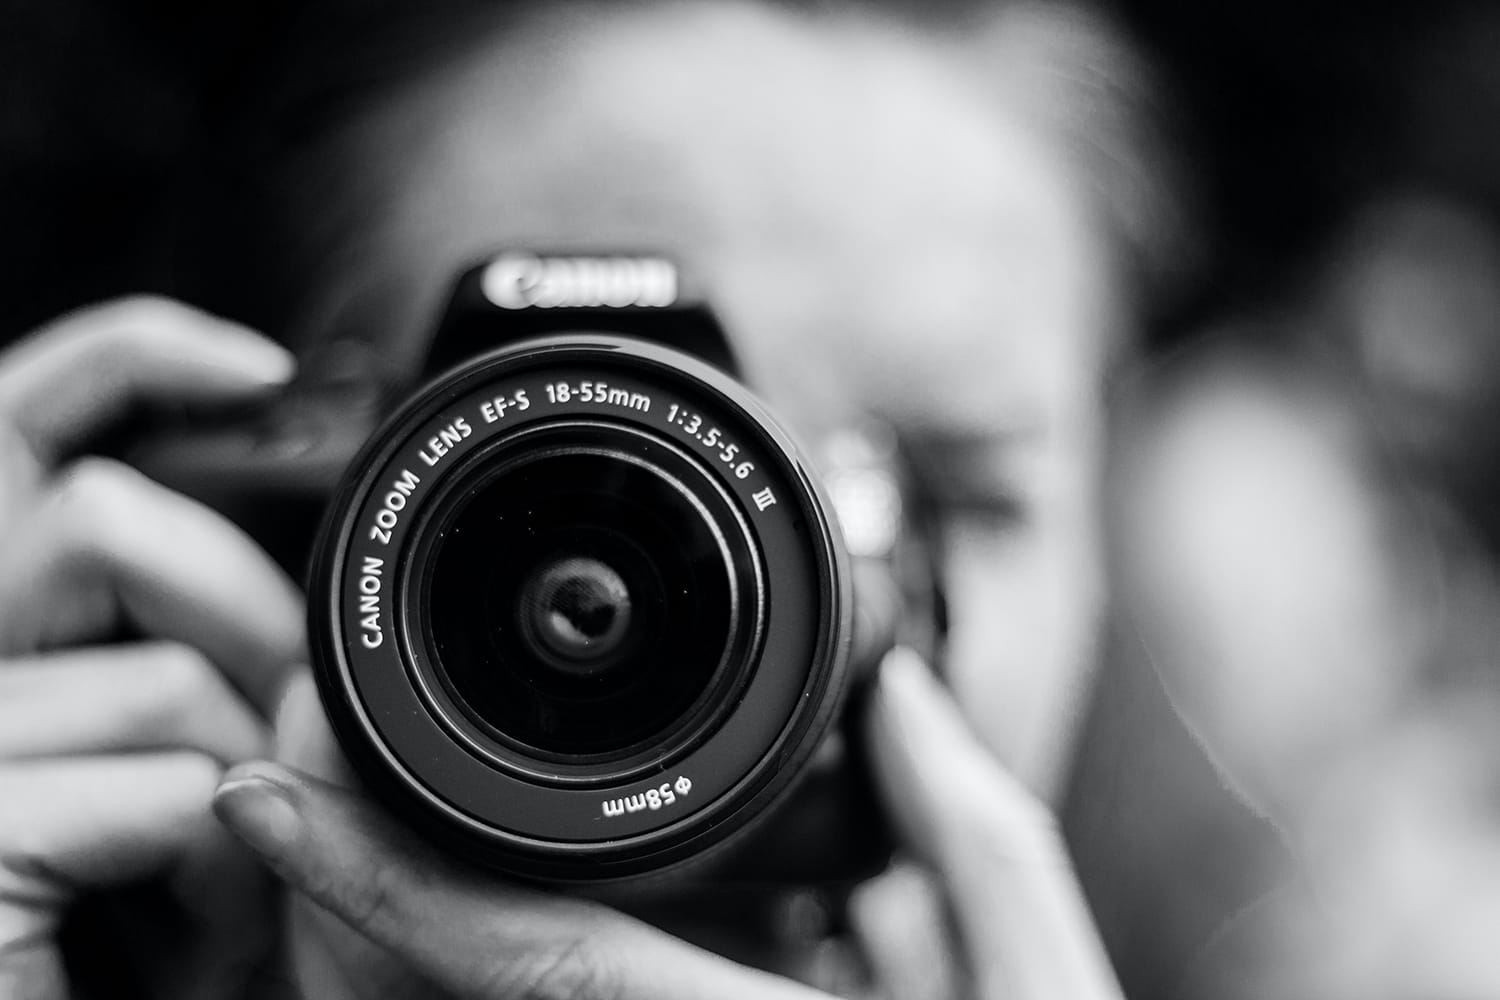 Top 10 Signs You're a Photography Geek